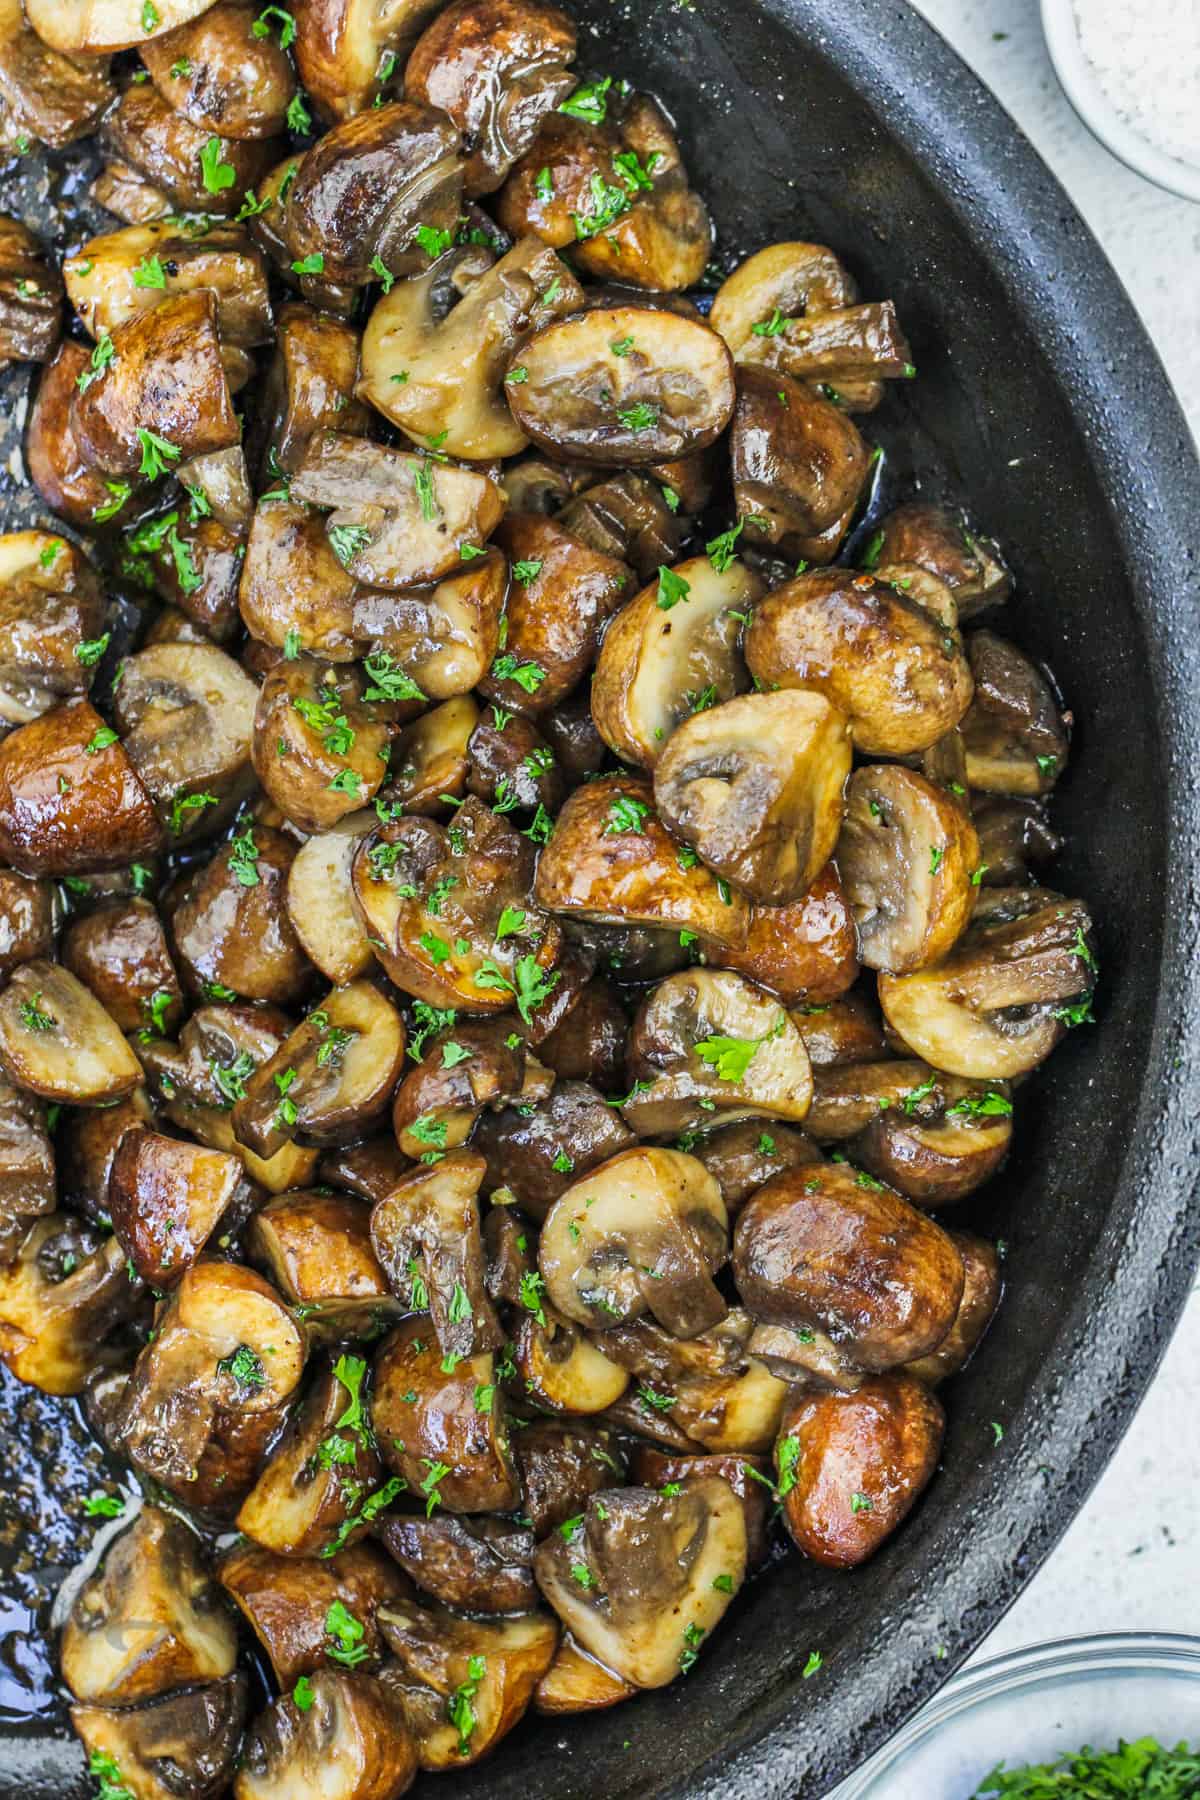 Sauteed Mushrooms cooking in a pan